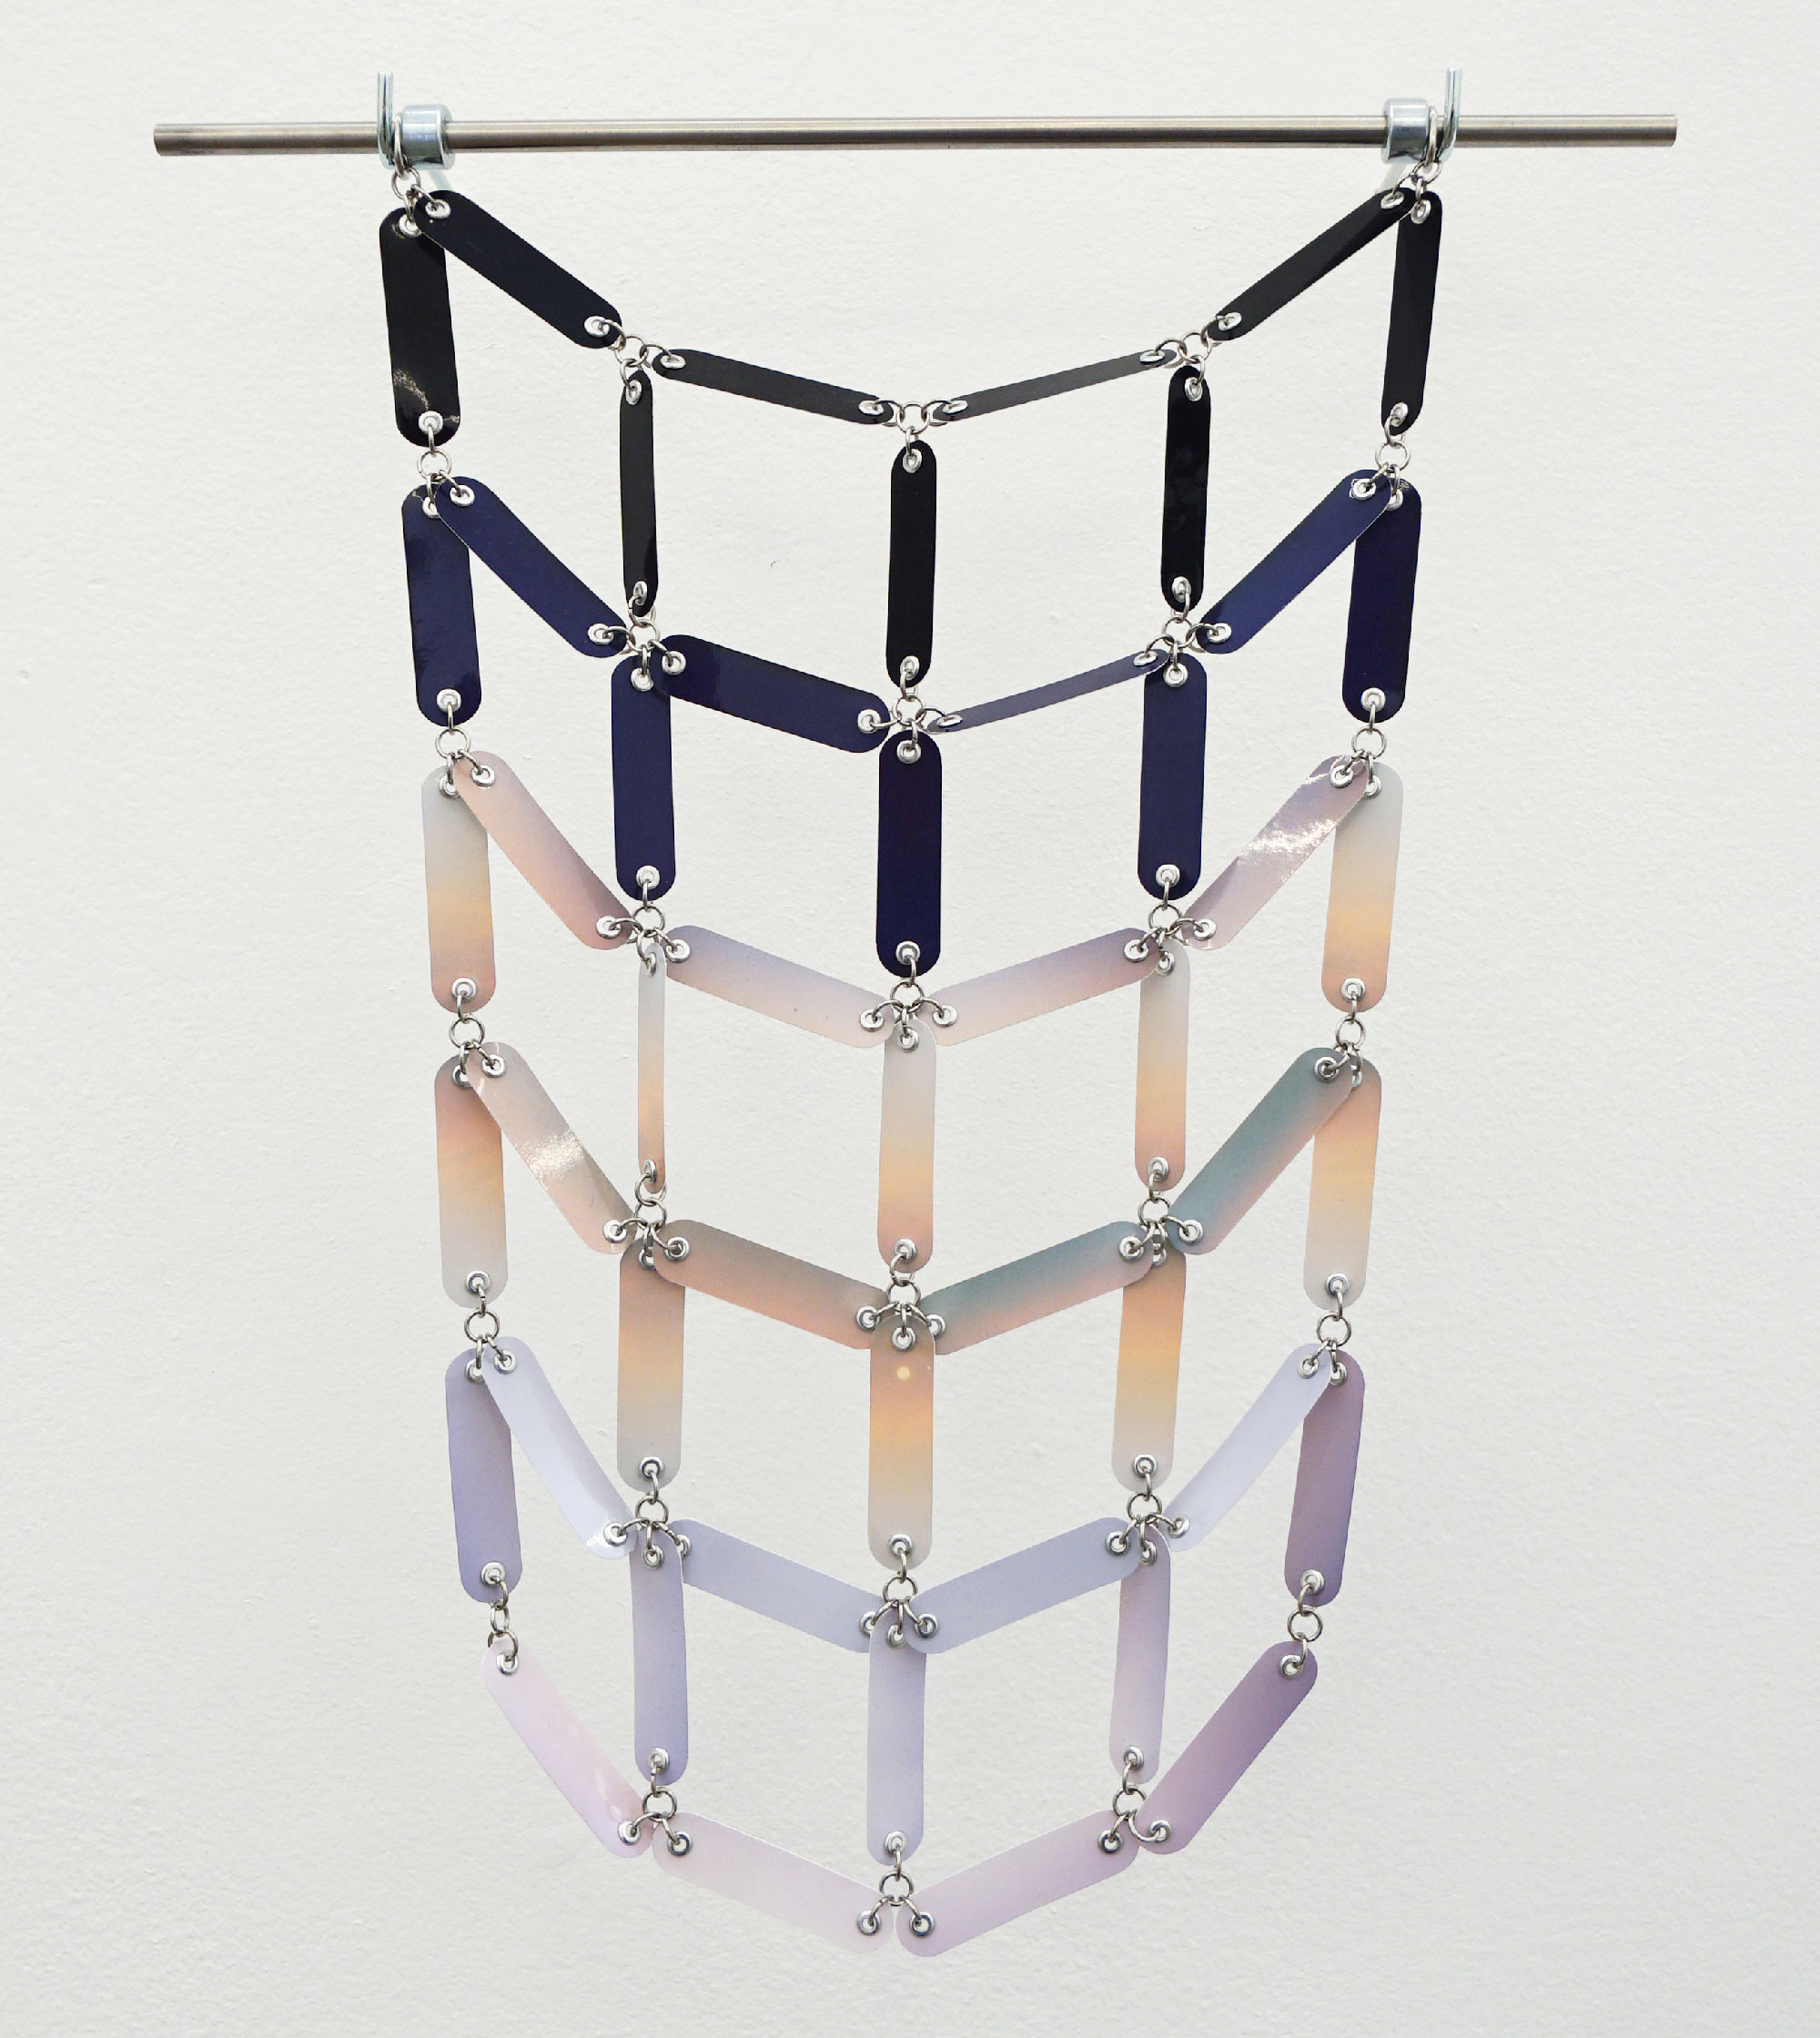 hanging wall sculpture with connected segments of grid hanging in curved drape